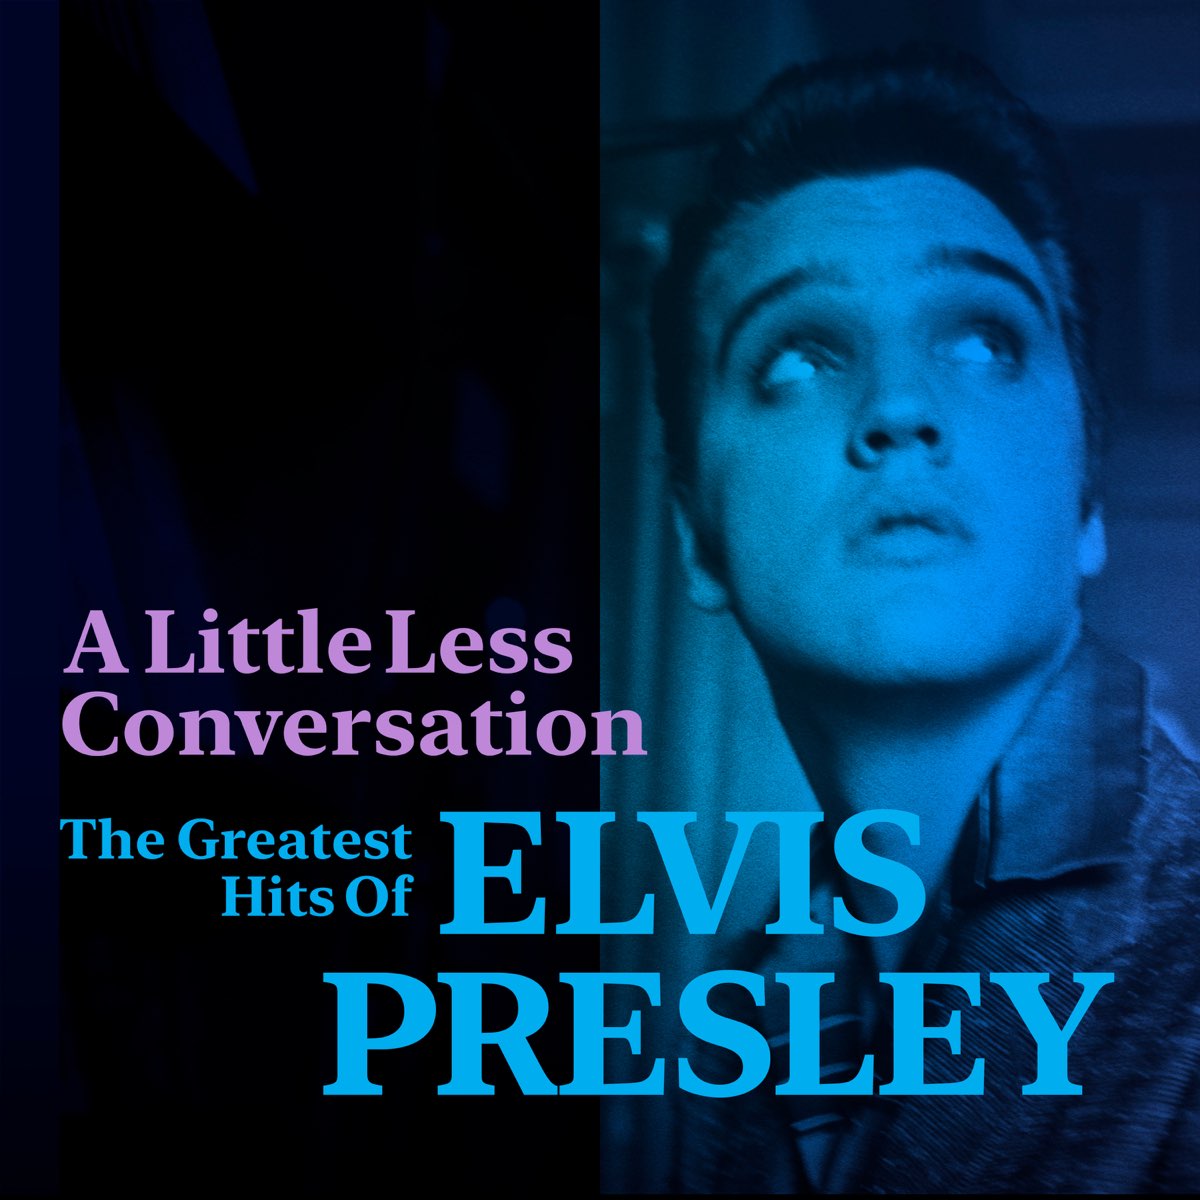 A Little Less Conversation: The Greatest Hits of Elvis Presley by Elvis  Presley on Apple Music